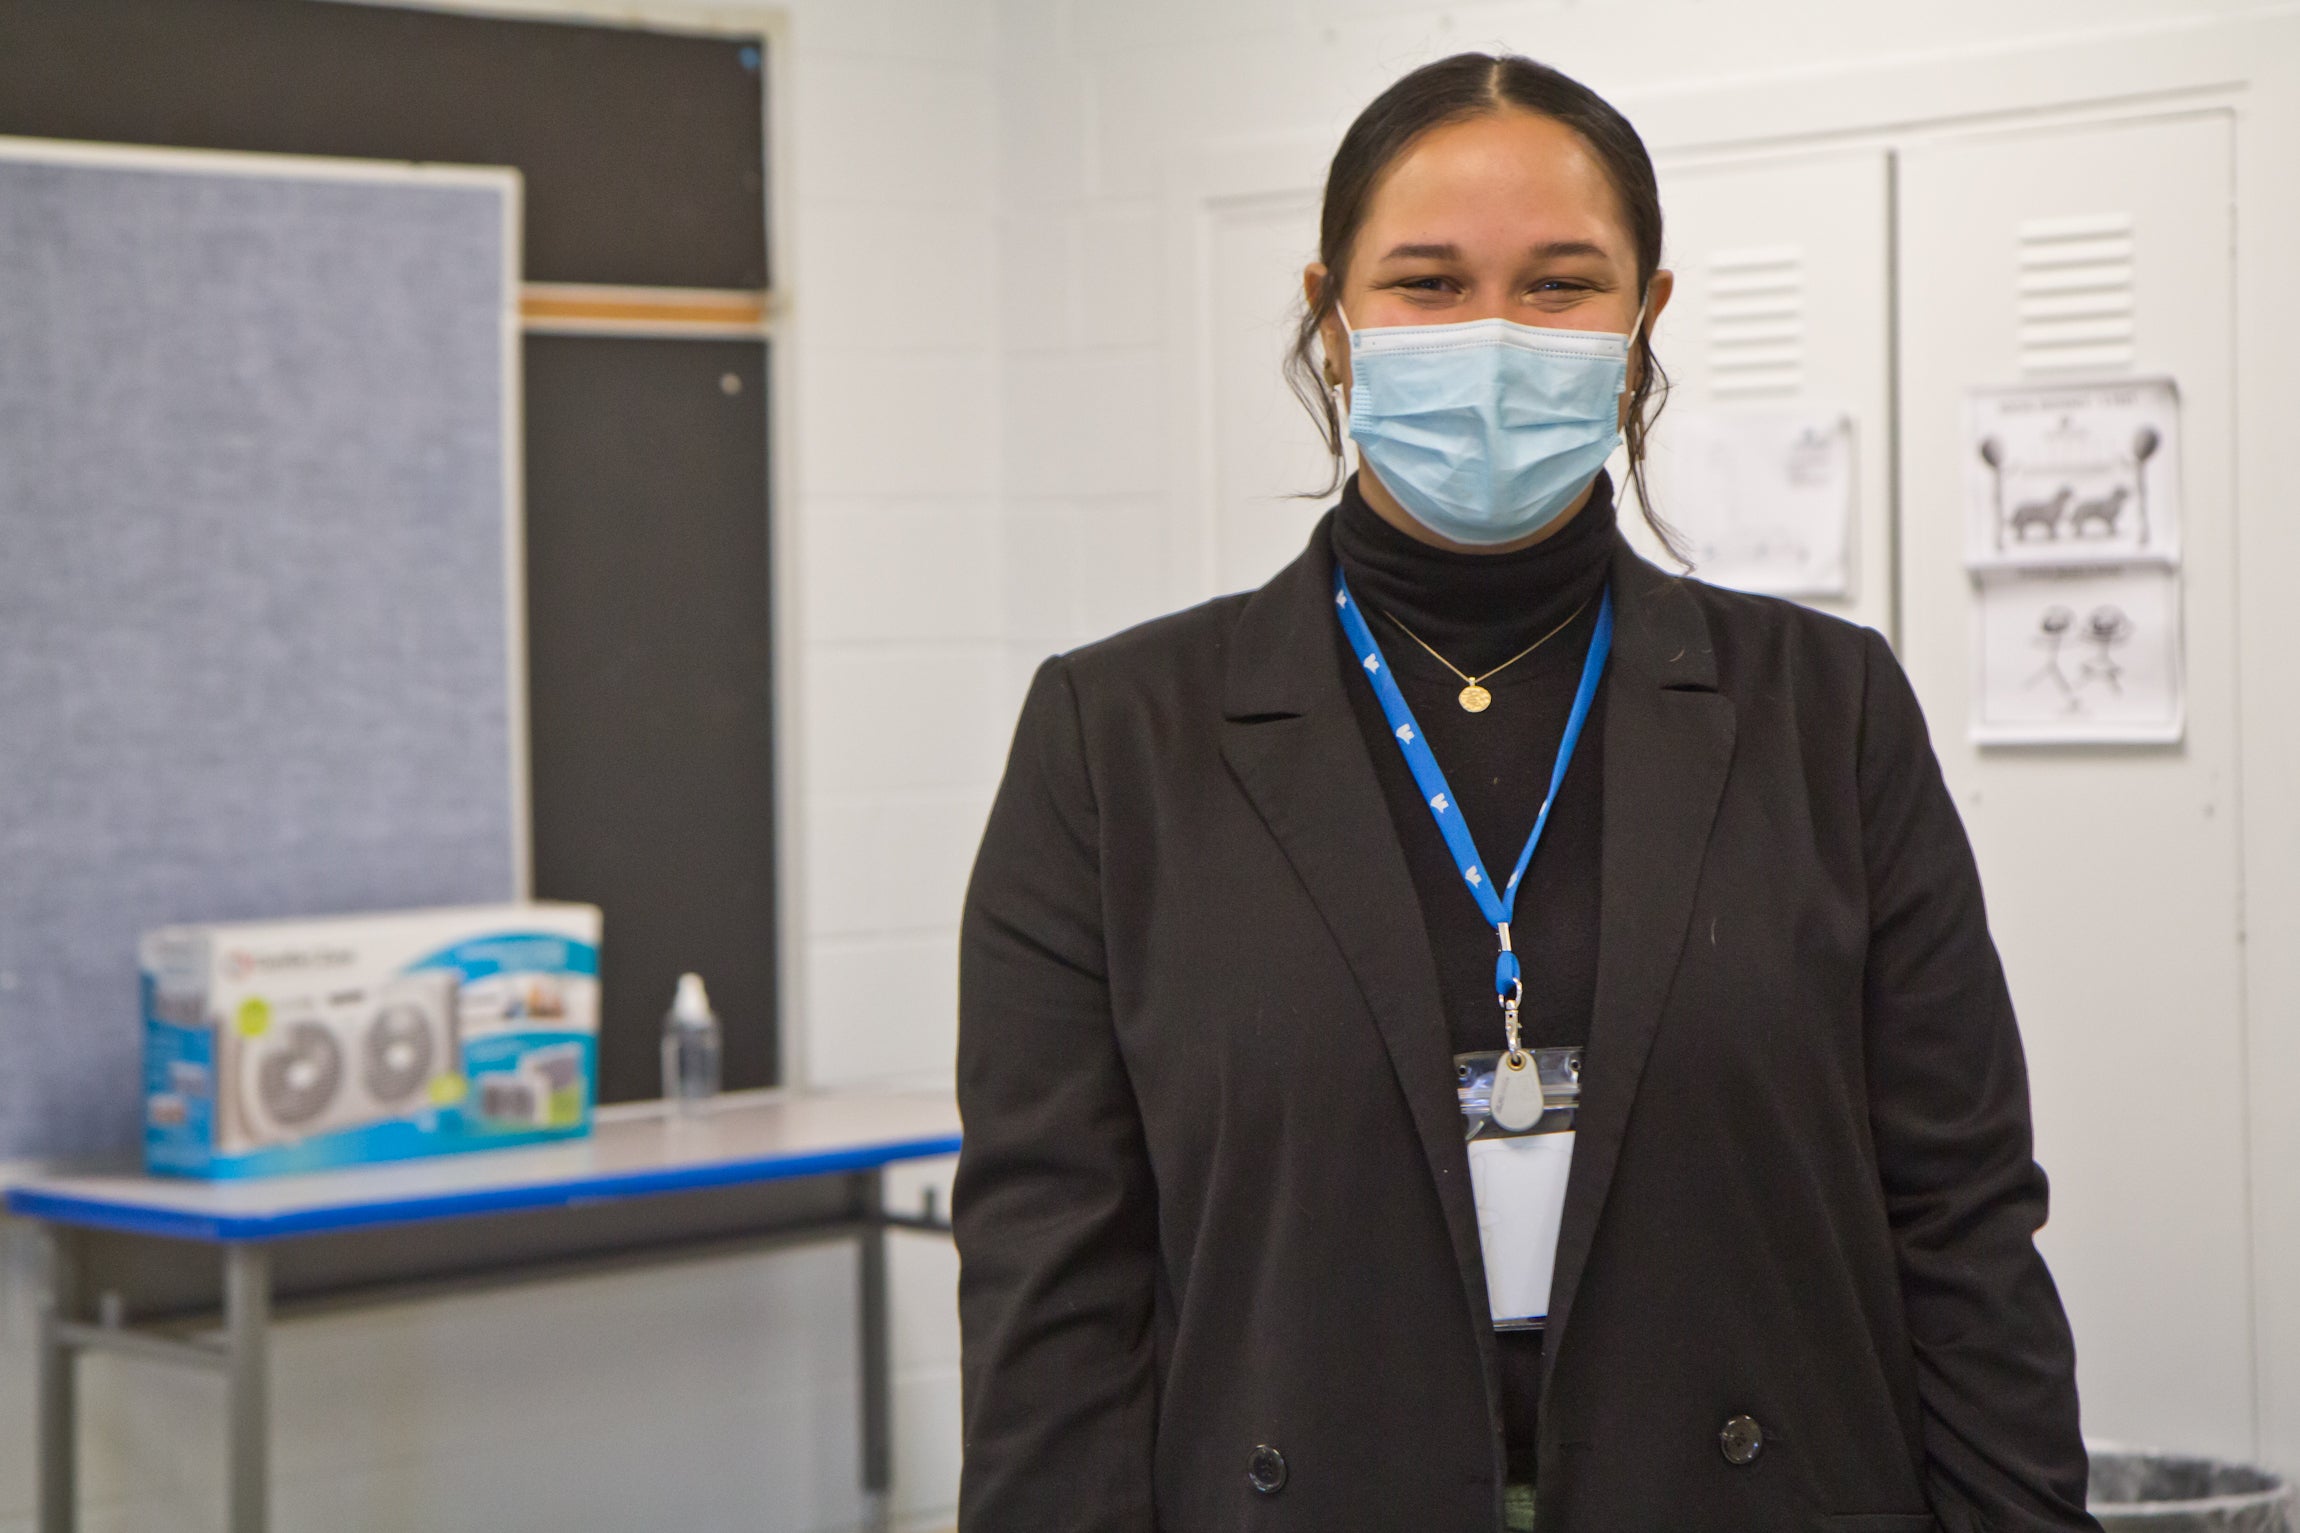 Alicia Bunch, wearing a face mask, stands inside a classroom